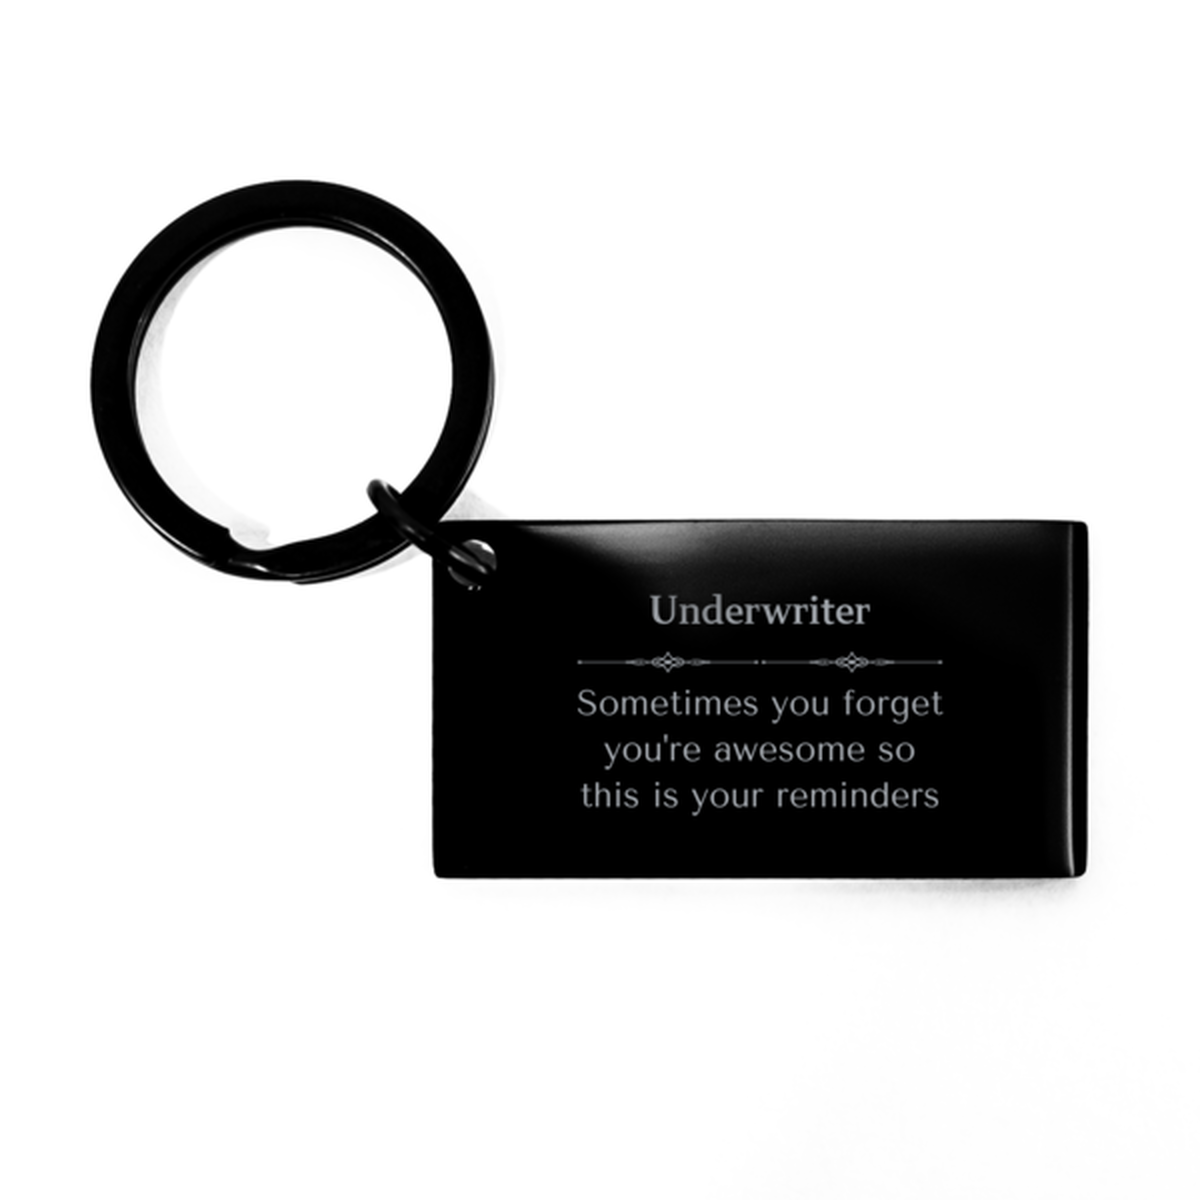 Sentimental Underwriter Keychain, Aeronautical Engineer Sometimes you forget you're awesome so this is your reminders, Graduation Christmas Birthday Gifts for Underwriter, Men, Women, Coworkers